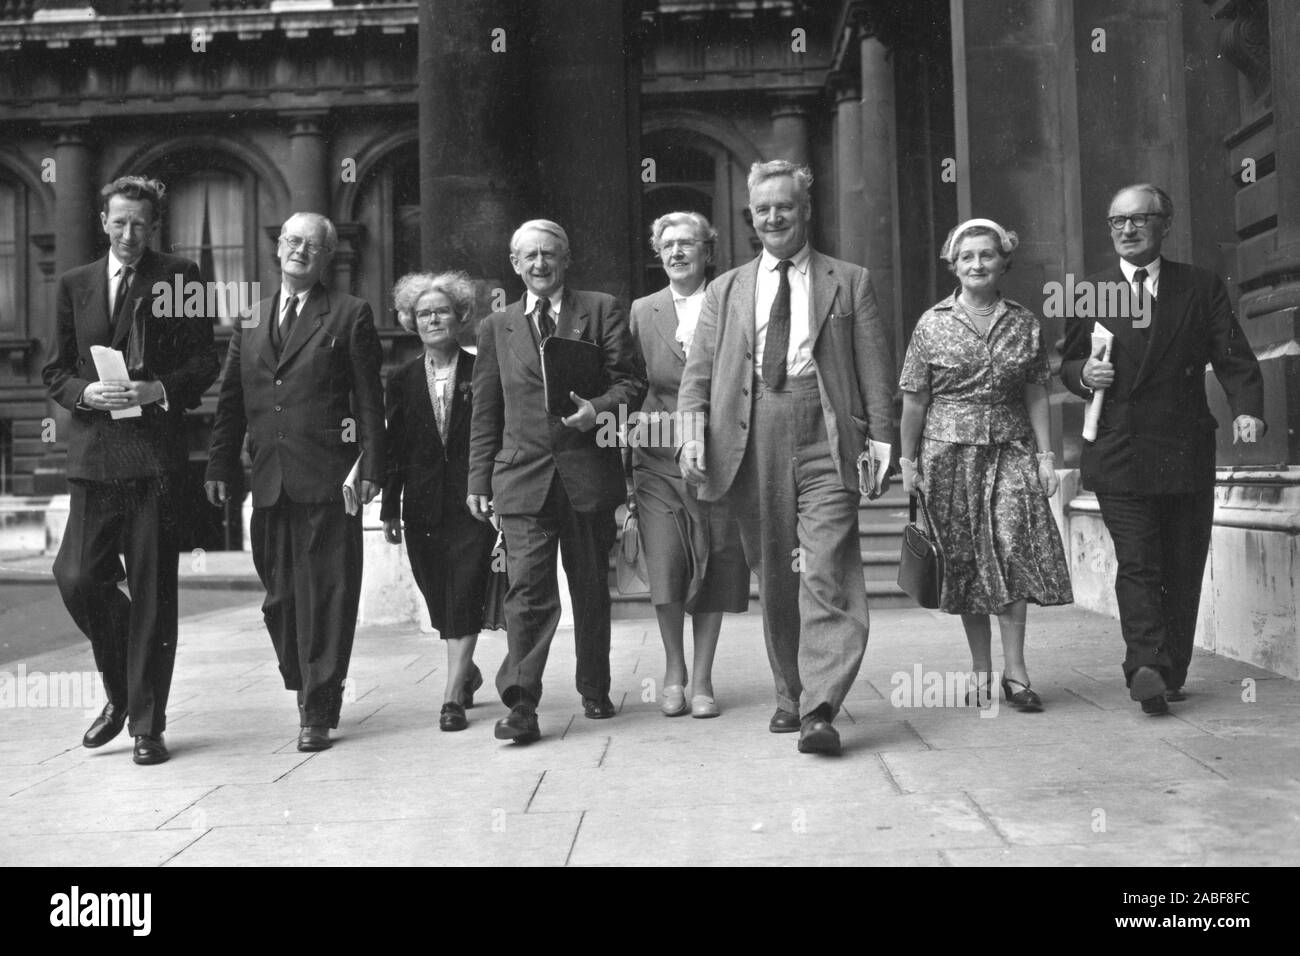 Pictured at the Foreign Office, Downing Street, London are members of a deputation - including two MPs - organised by the Peace Pledge Union. The object of their visit was to ask the Government to suspend mobilisation and to use the London conference on the Suez Canal as a stepping stone to negotiations with Colonel Nasser and not as 'a means of dictating to him'.  In the deputation are (L-R) Hugh Brock, A. Fenner Brockway, MP (Labour, Eton and Slough), Professor Dame Kathleen Lonsdale, Stuart Morris, Secretary of the Peace Pledge Union, Sybil Morrison, Emrys Hughes, MP (Labour, South Ayrshire Stock Photo